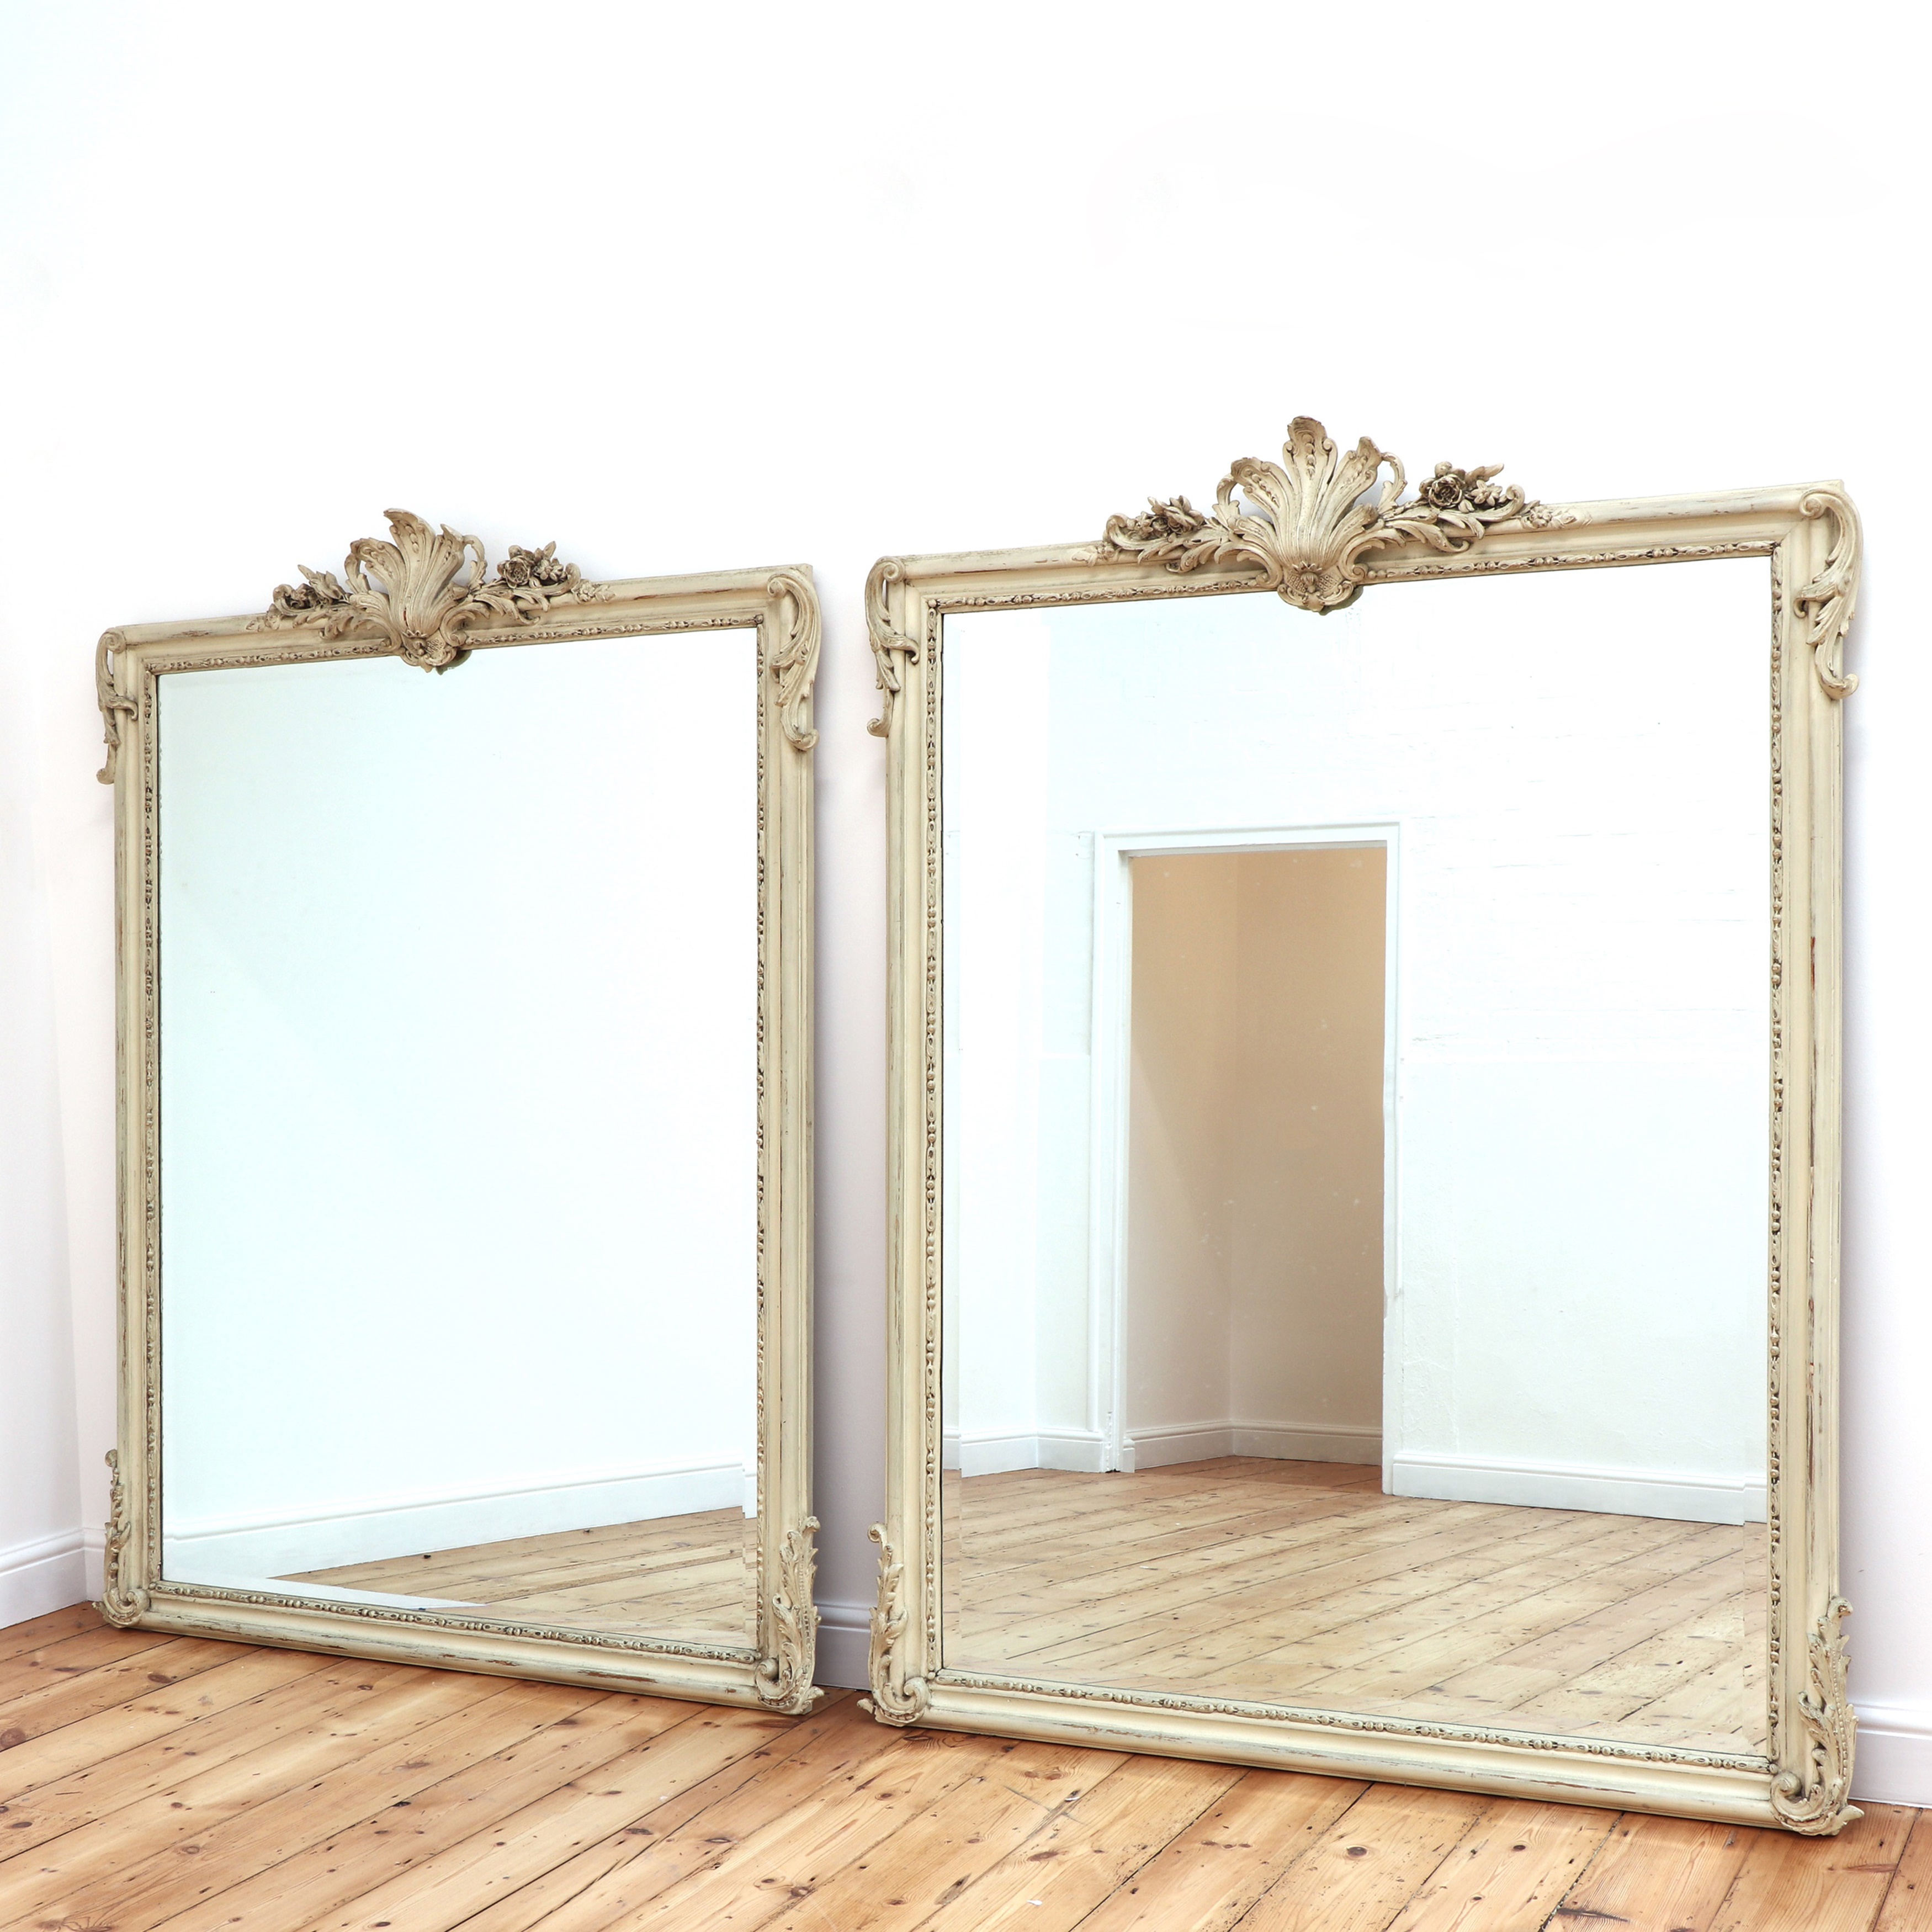 A pair of white painted mirrors